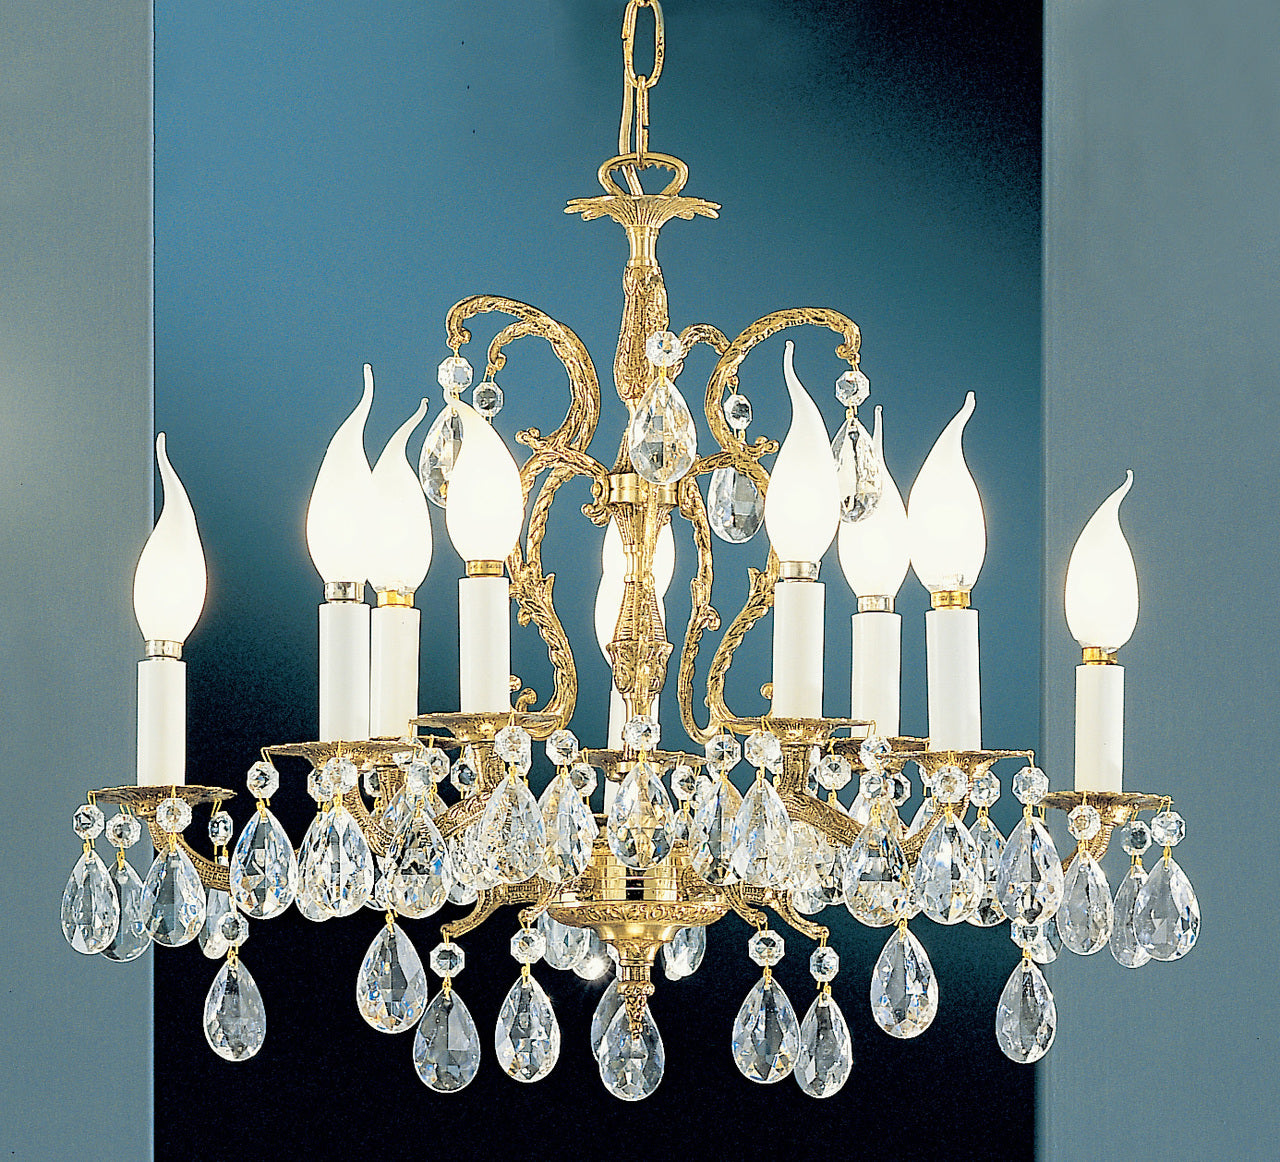 Classic Lighting 5210 OWB C Barcelona Crystal/Cast Brass Chandelier in Olde World Bronze (Imported from Spain)